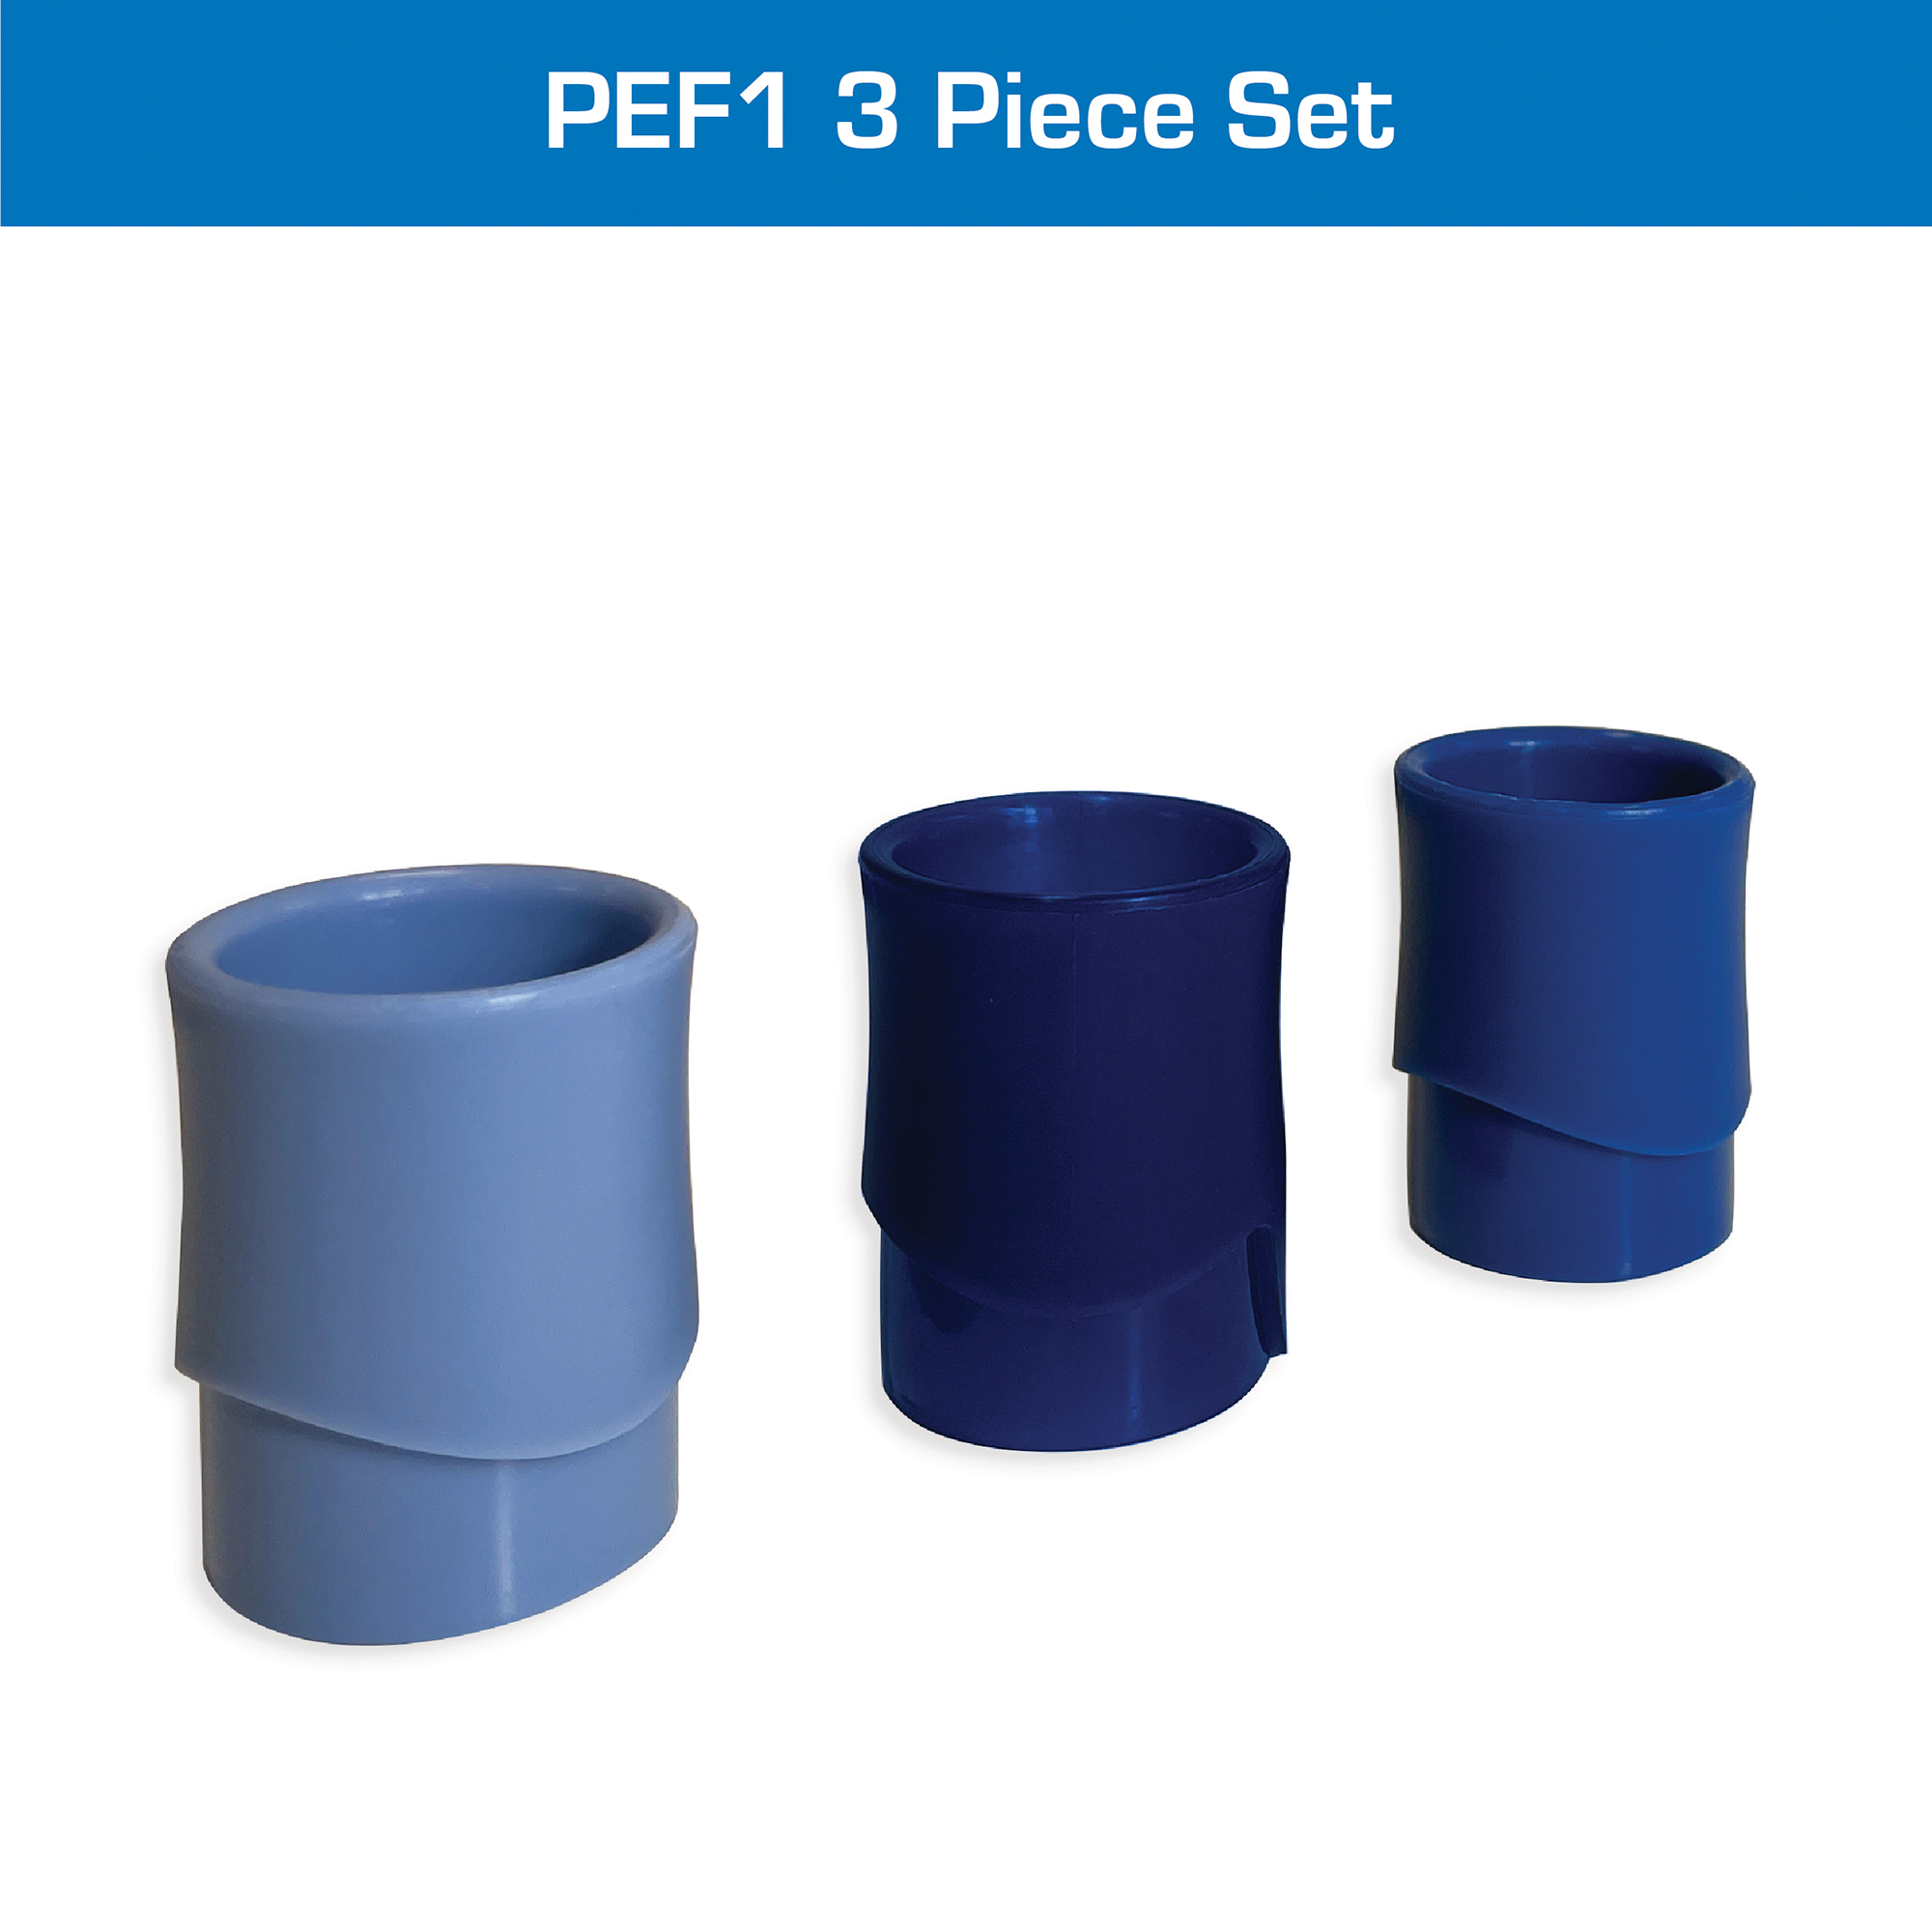 Peak Flow Meter Replacement Mouthpieces, 3-Pack